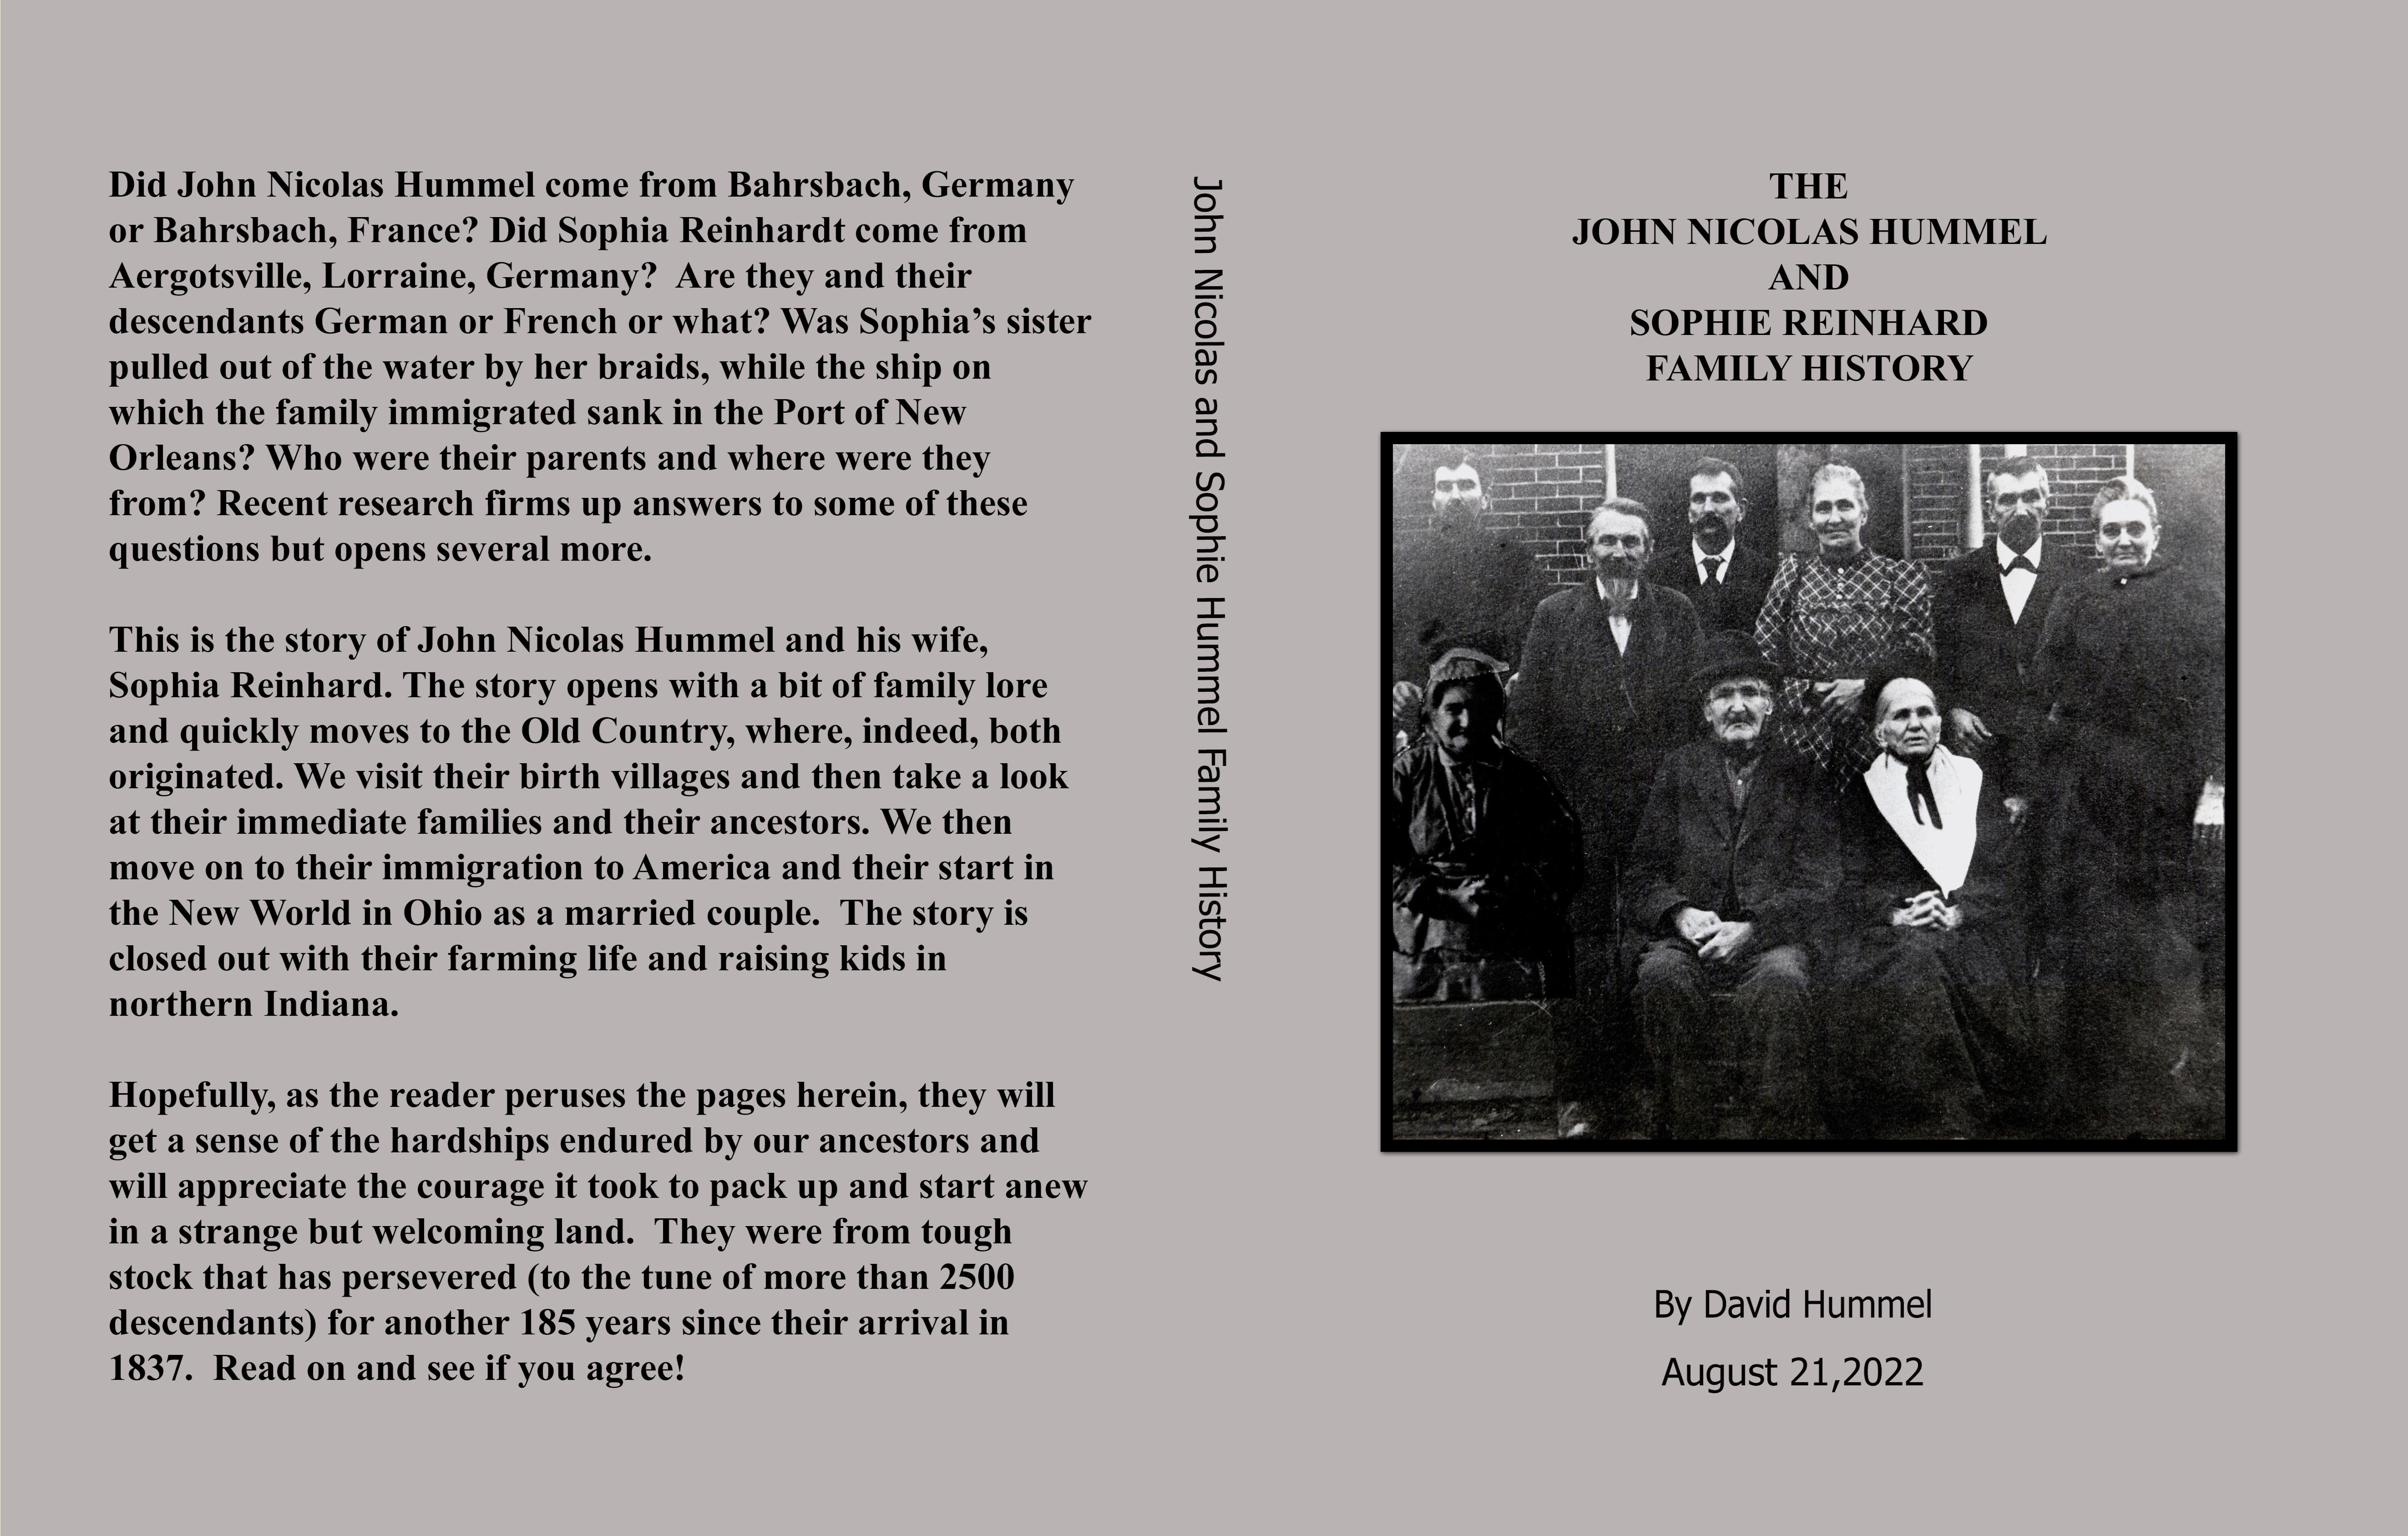 The John Nicolas Hummel and Sophie Reinhard Family History cover image